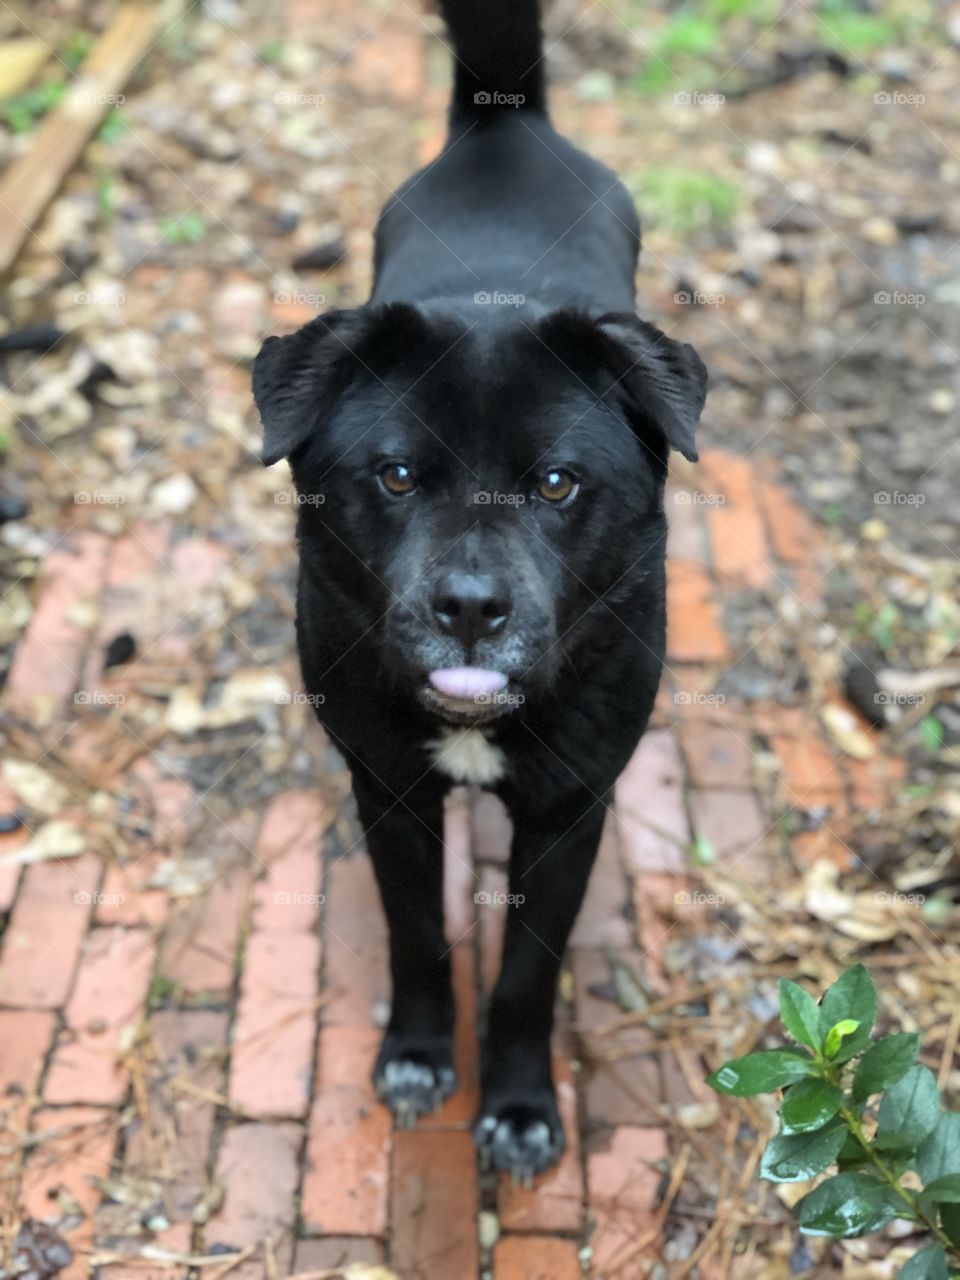 Black dog with tongue out